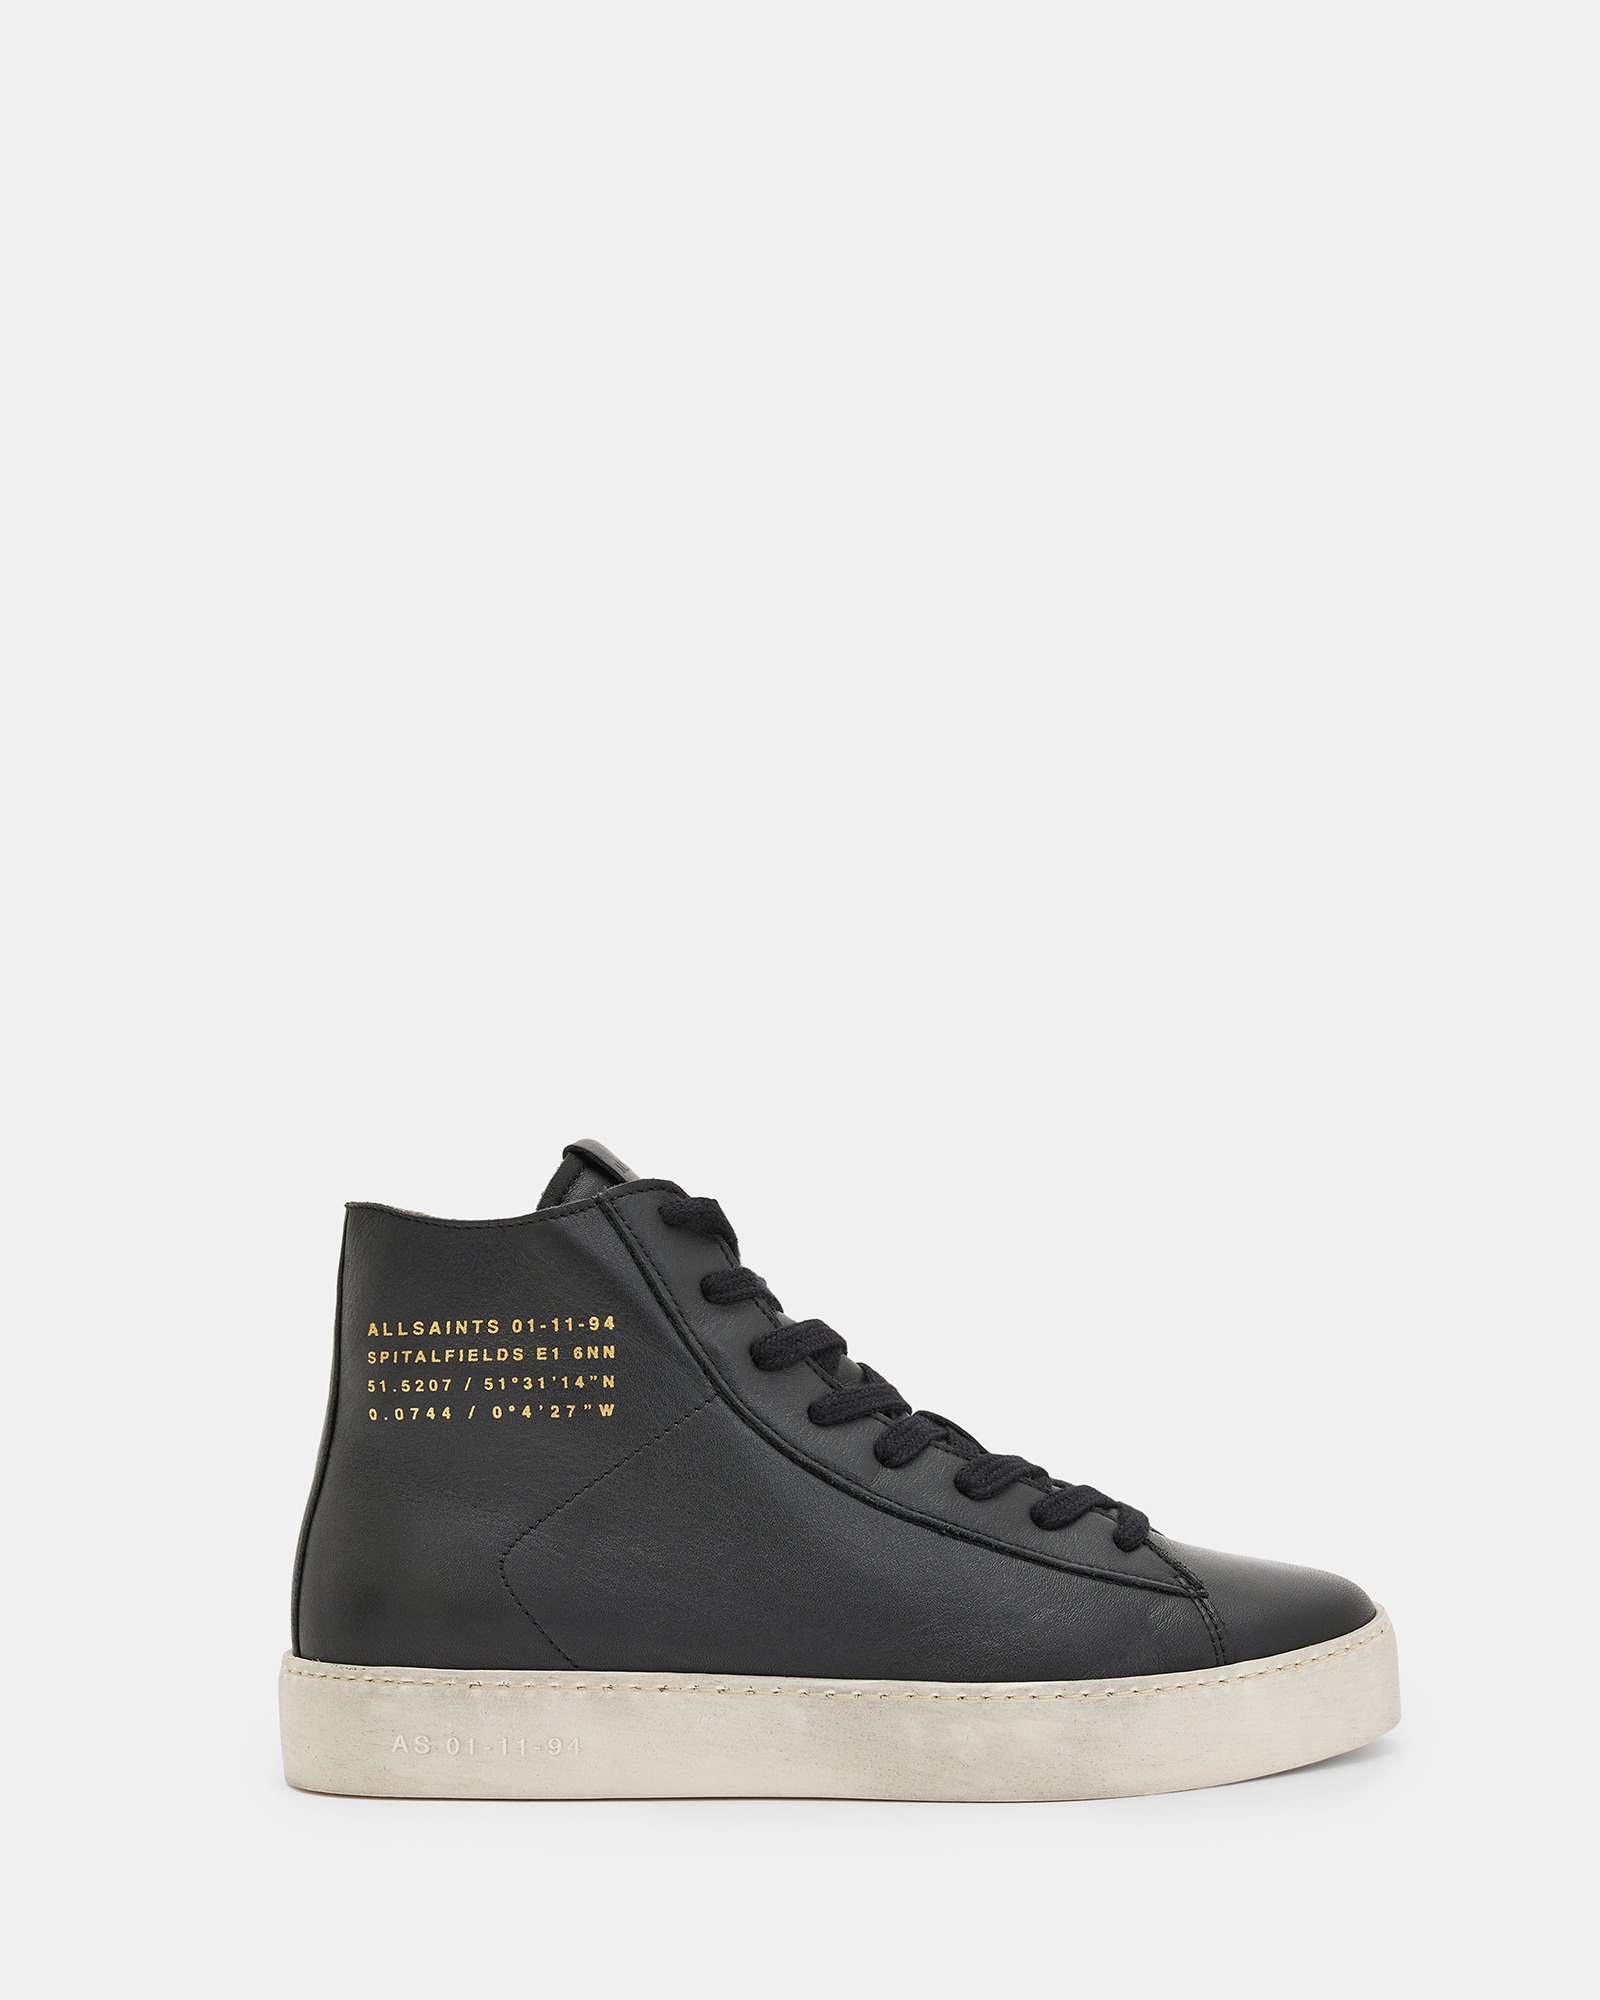 AllSaints Tana Leather High Top Trainers,, Black, Size: UK